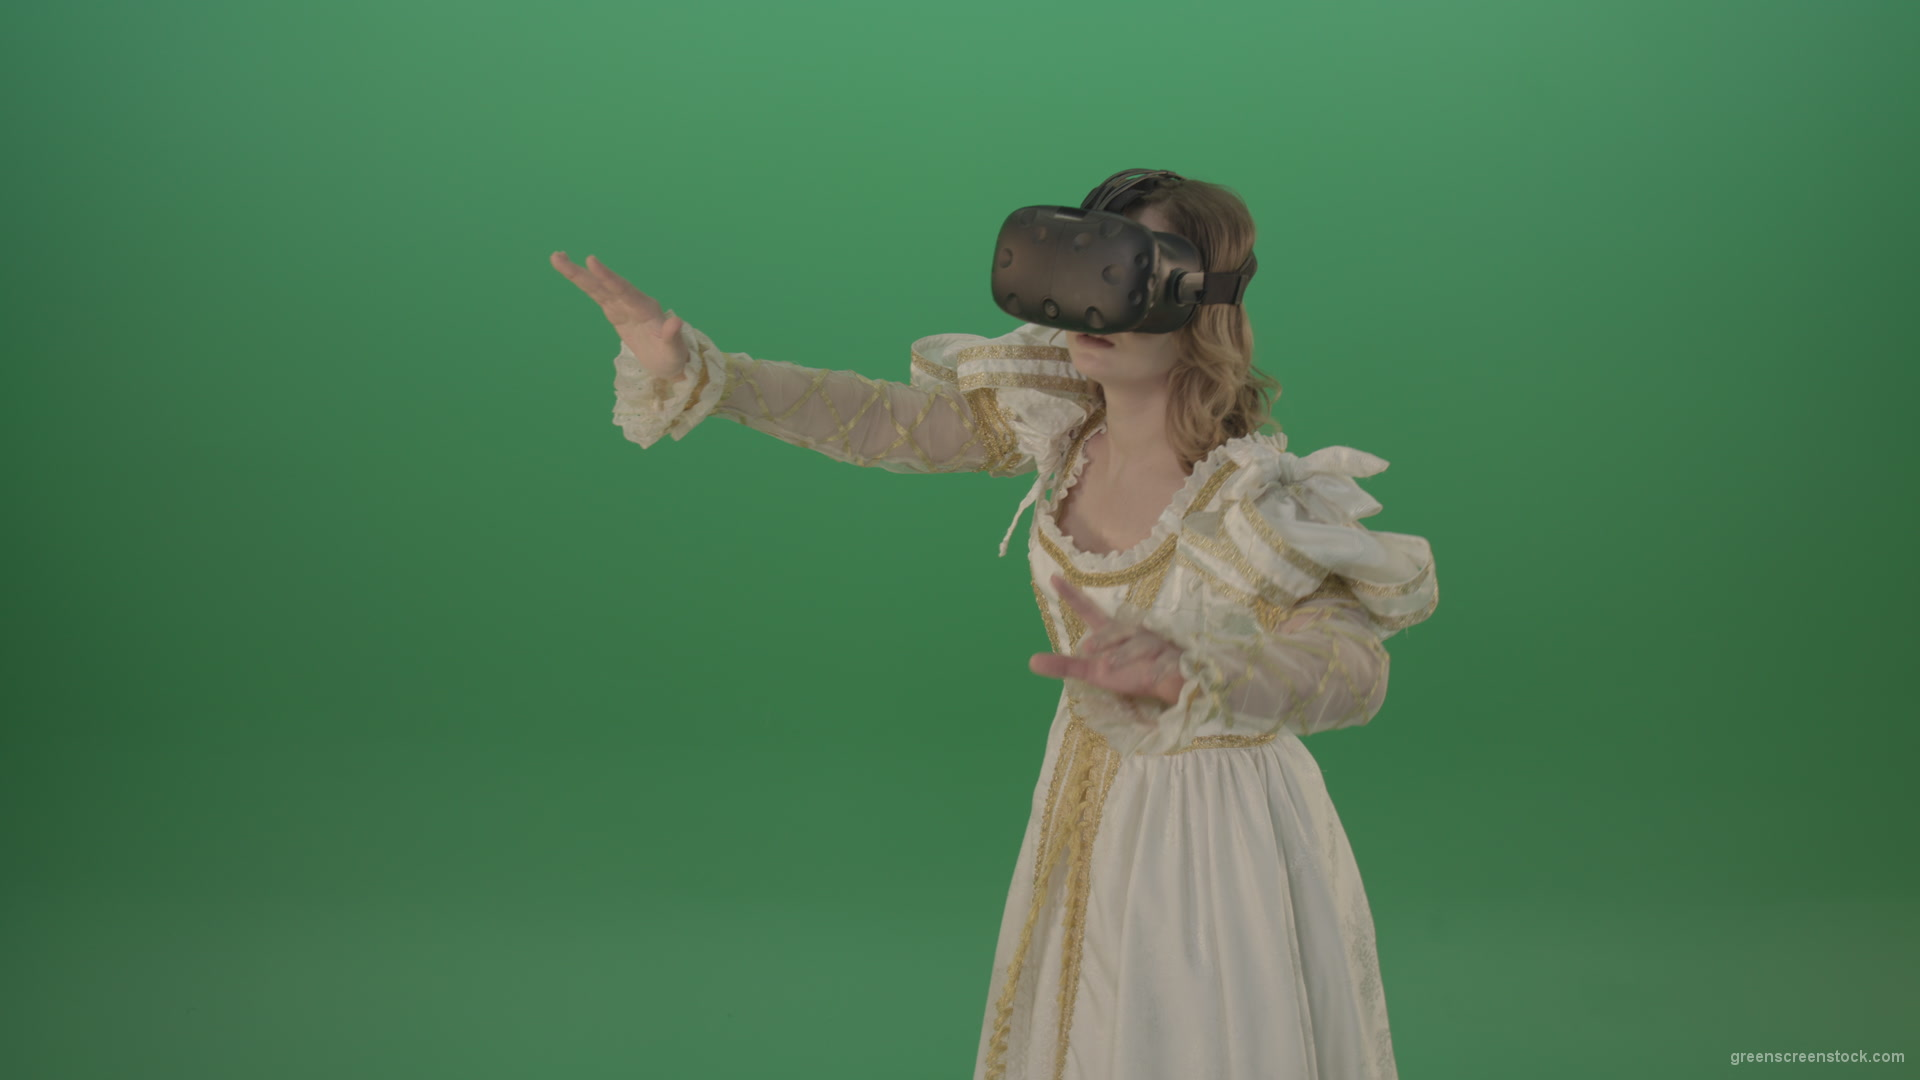 3d-glasses-of-virtual-reality-the-girl-looked-into-the-virtual-world-isolated-on-green-screen_006 Green Screen Stock